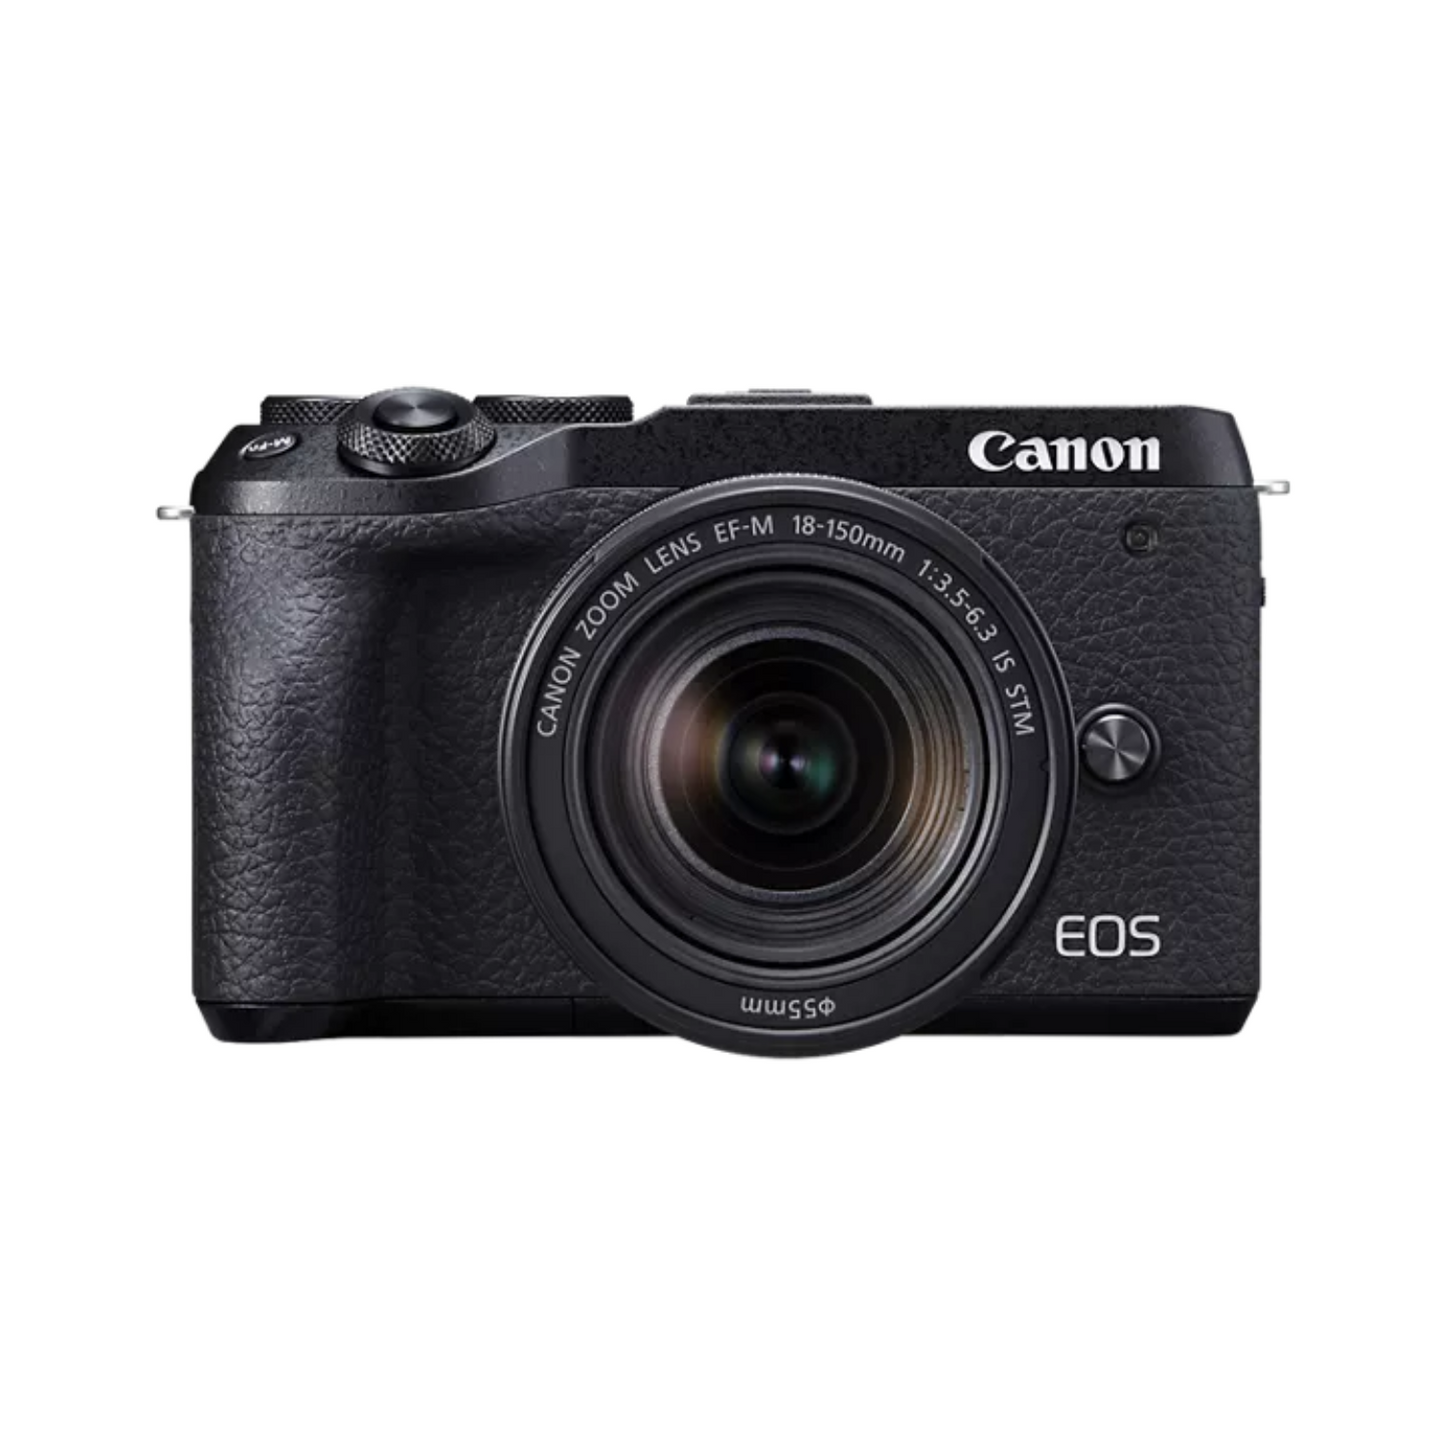 Canon EOS M6 with 18-150MM Kit Lens Mirrorless Camera Black